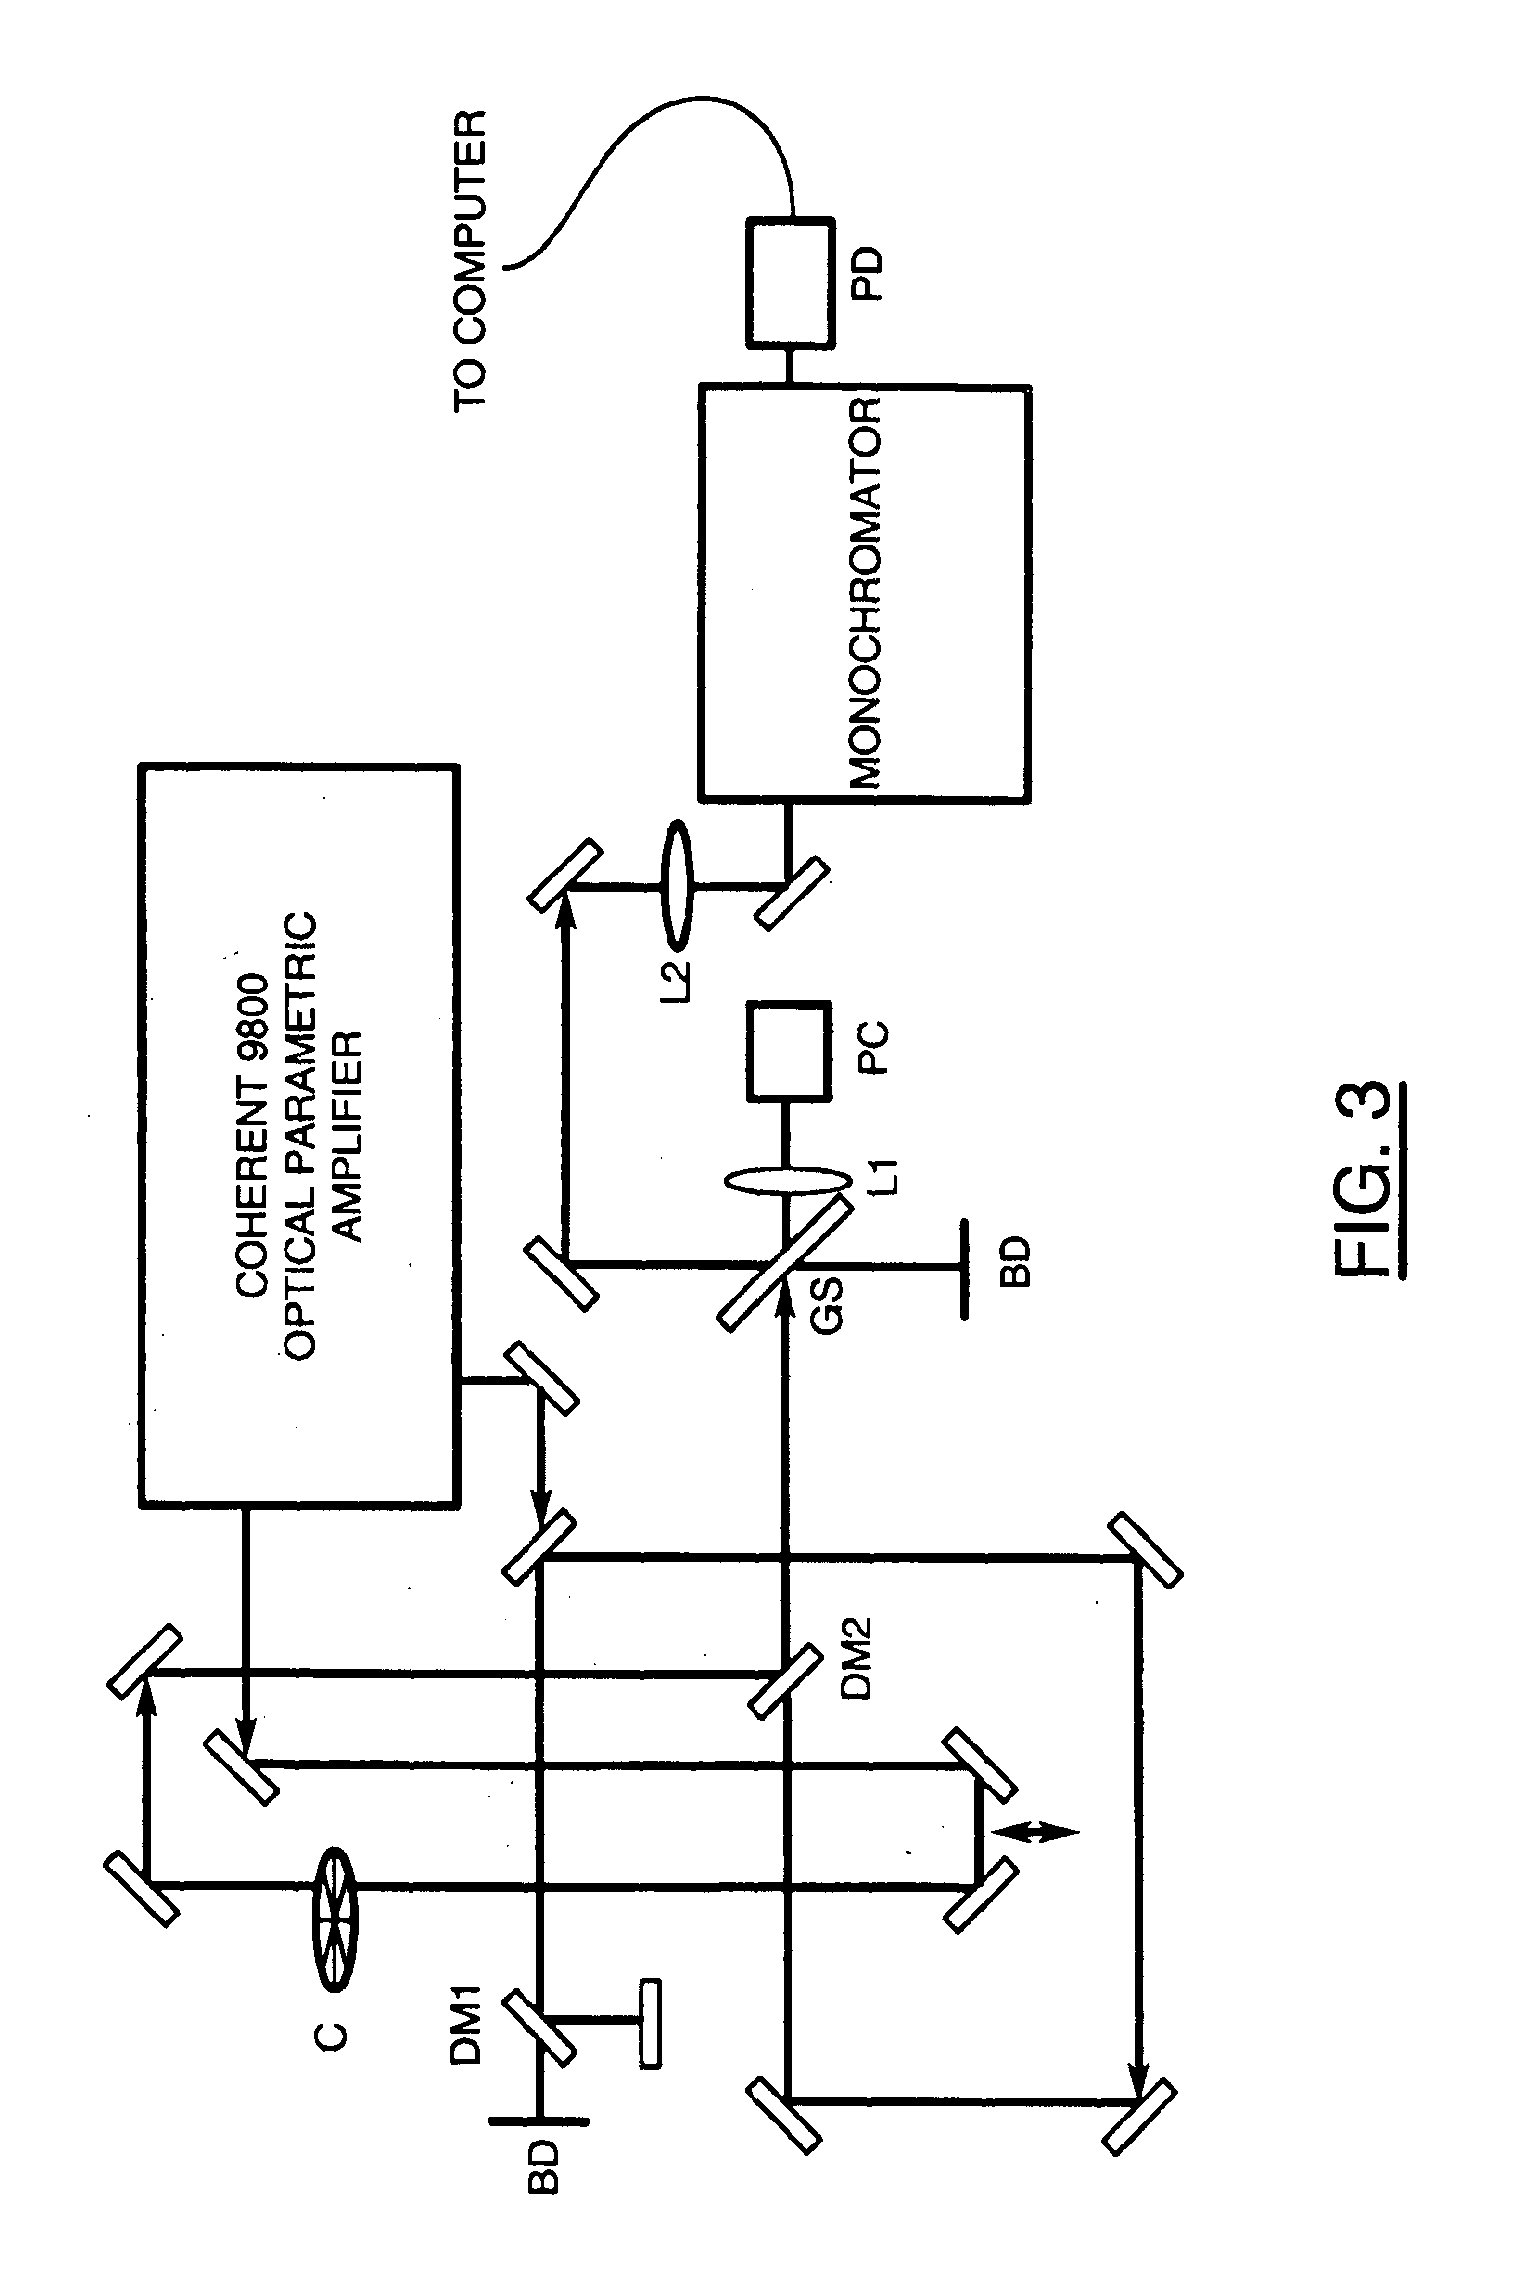 Method of varying optical properties of photonic crystals on fast time scales using energy pulses